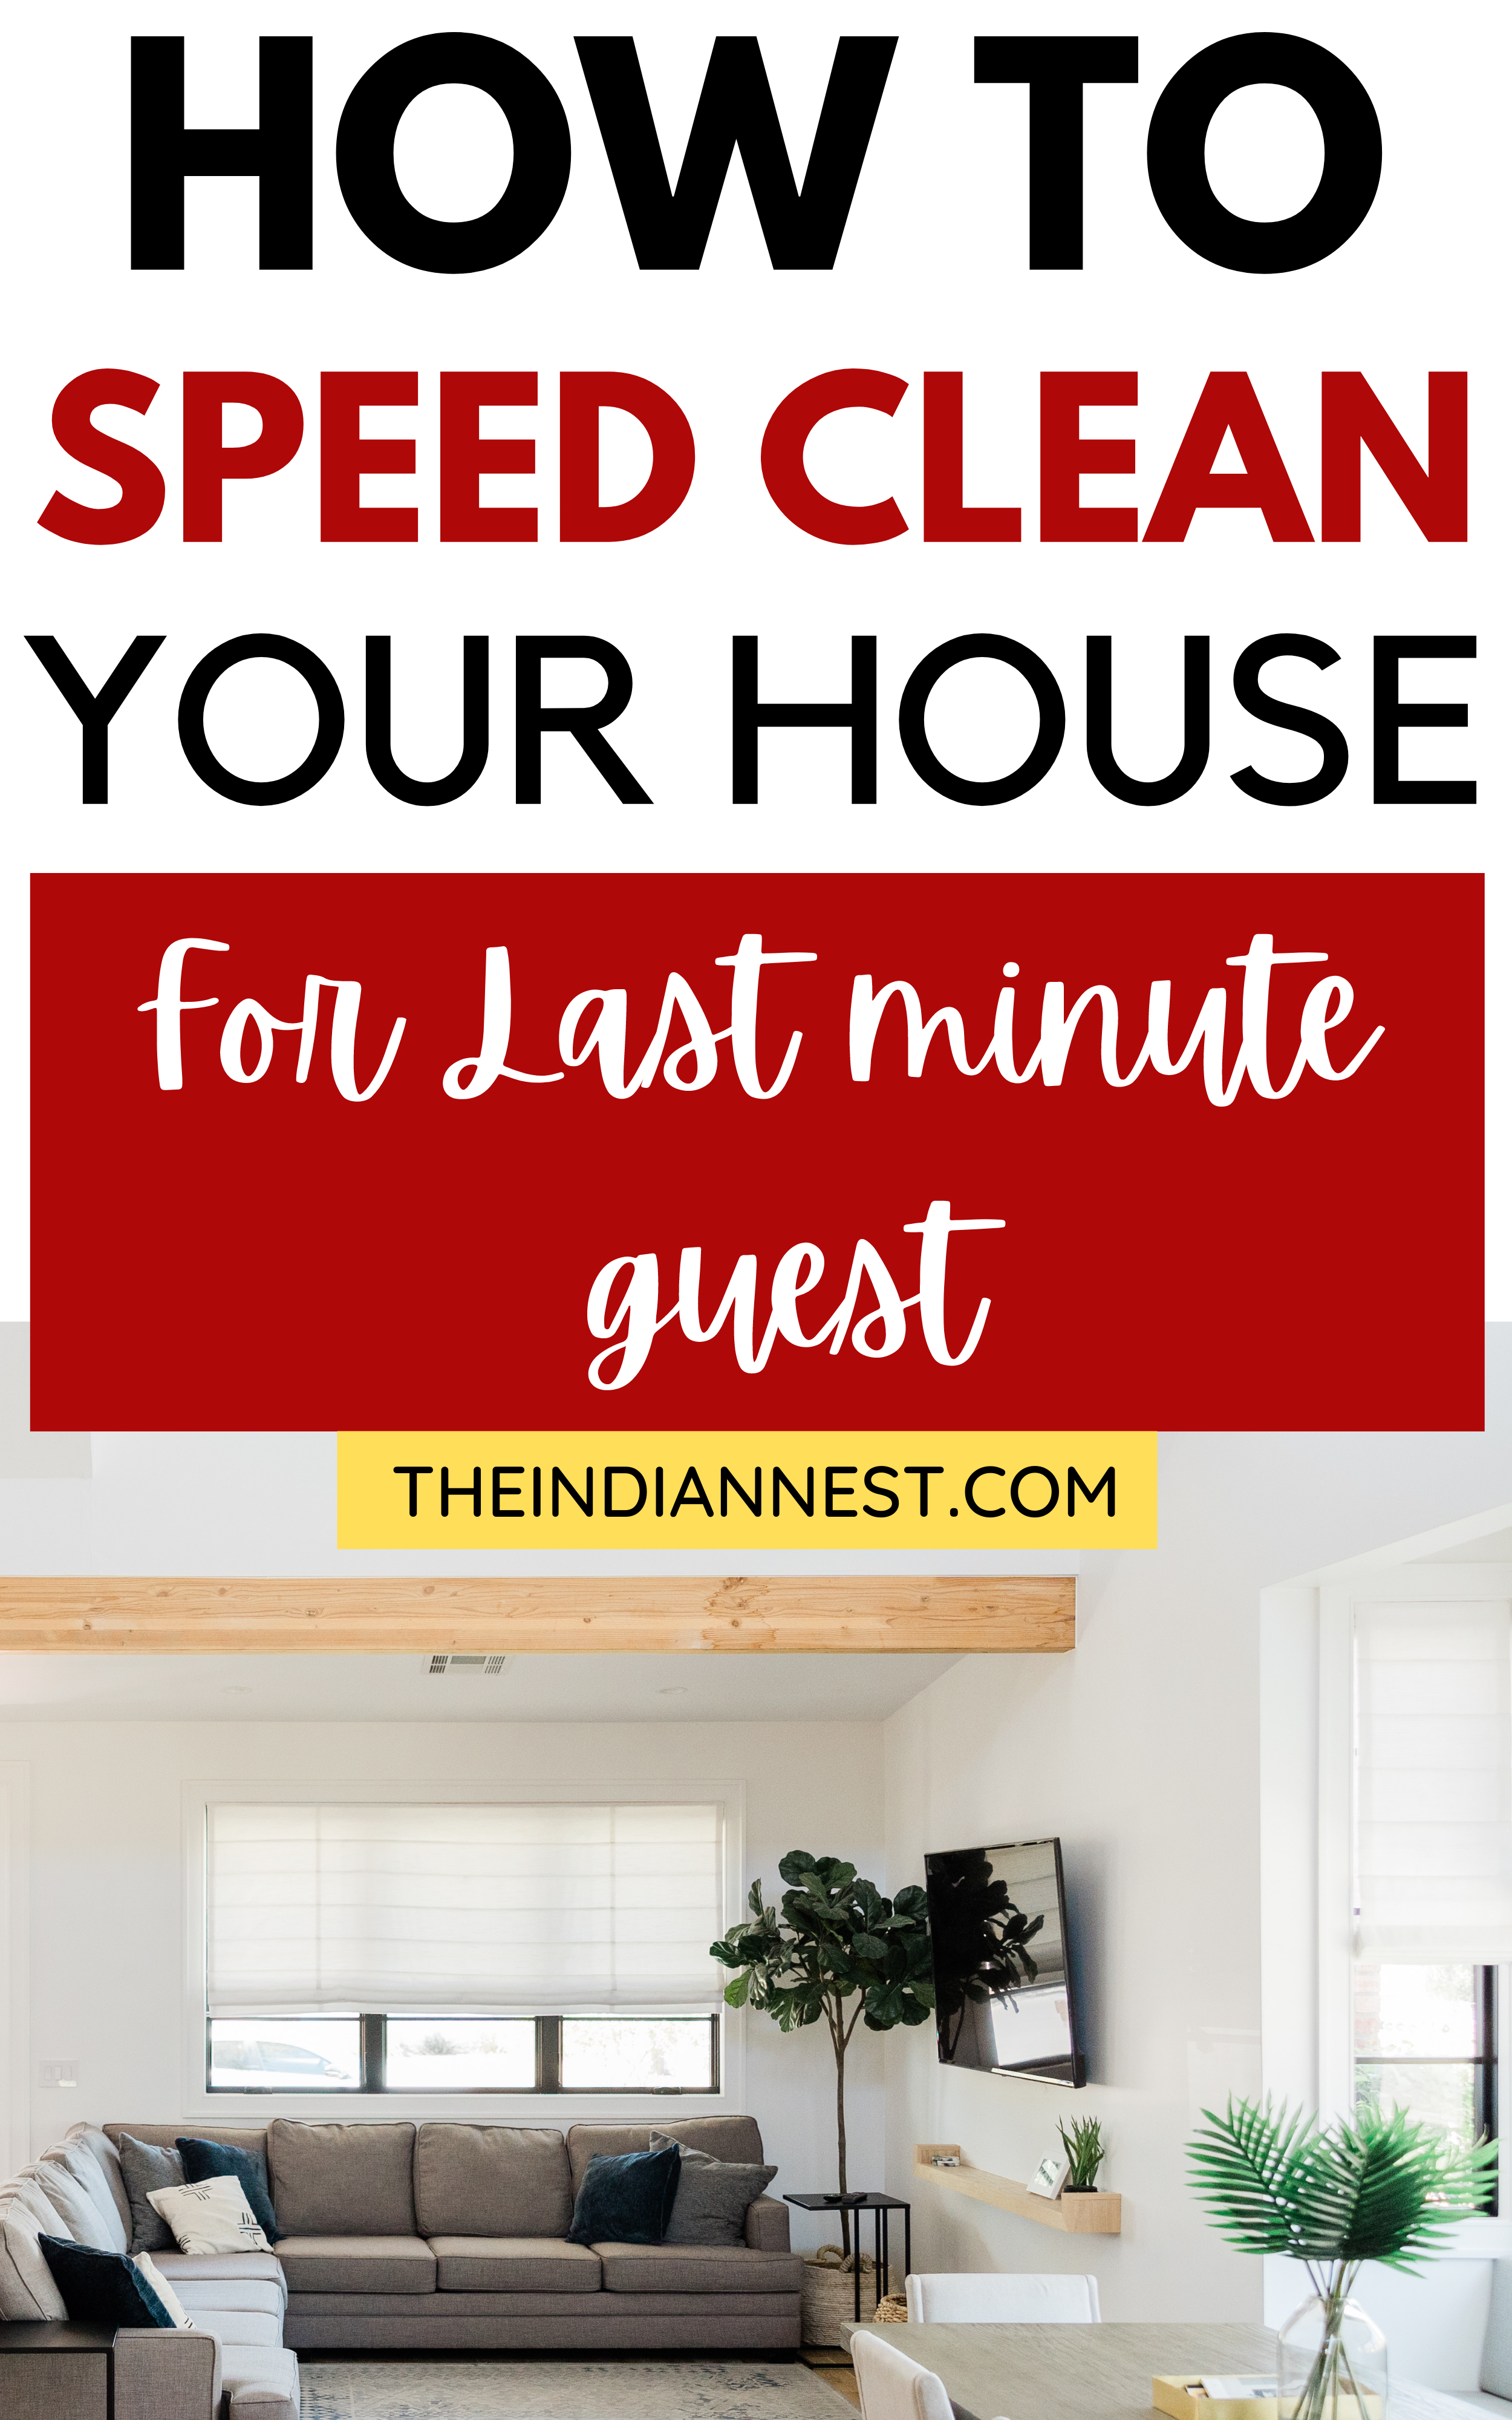  How to speed clean your home? How to Clean Your House in less time. Speed cleaning is an excellent way to transition to a more thorough routine. Do a round of it one day. Fastest way to clean a house before the guests comes.